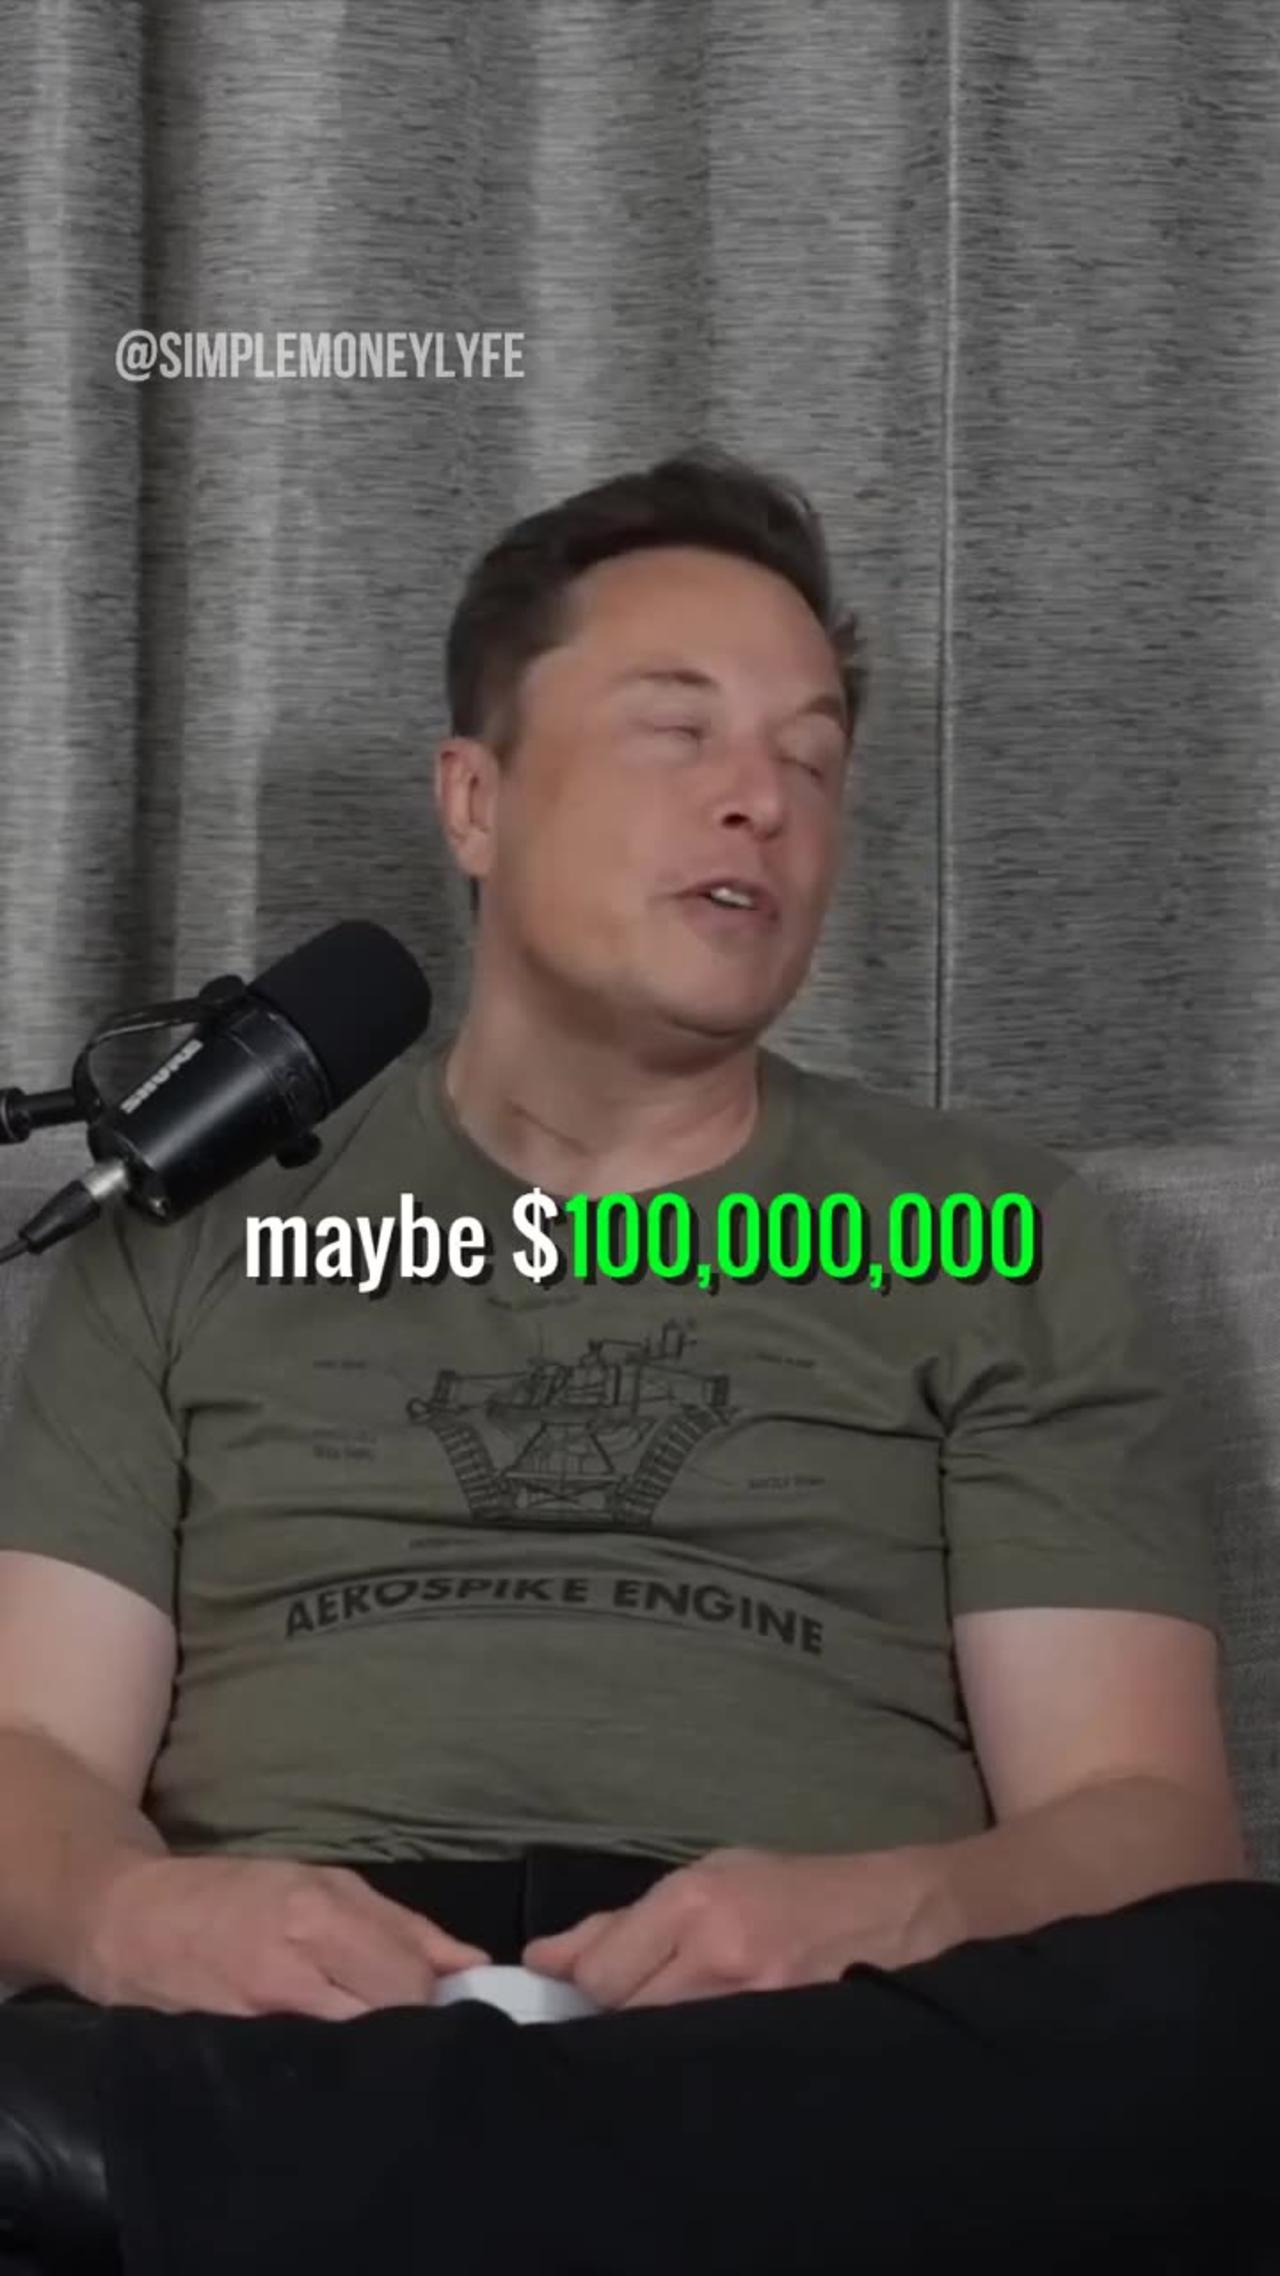 "Elon Musk Unveils the Cost of Launching Rockets: